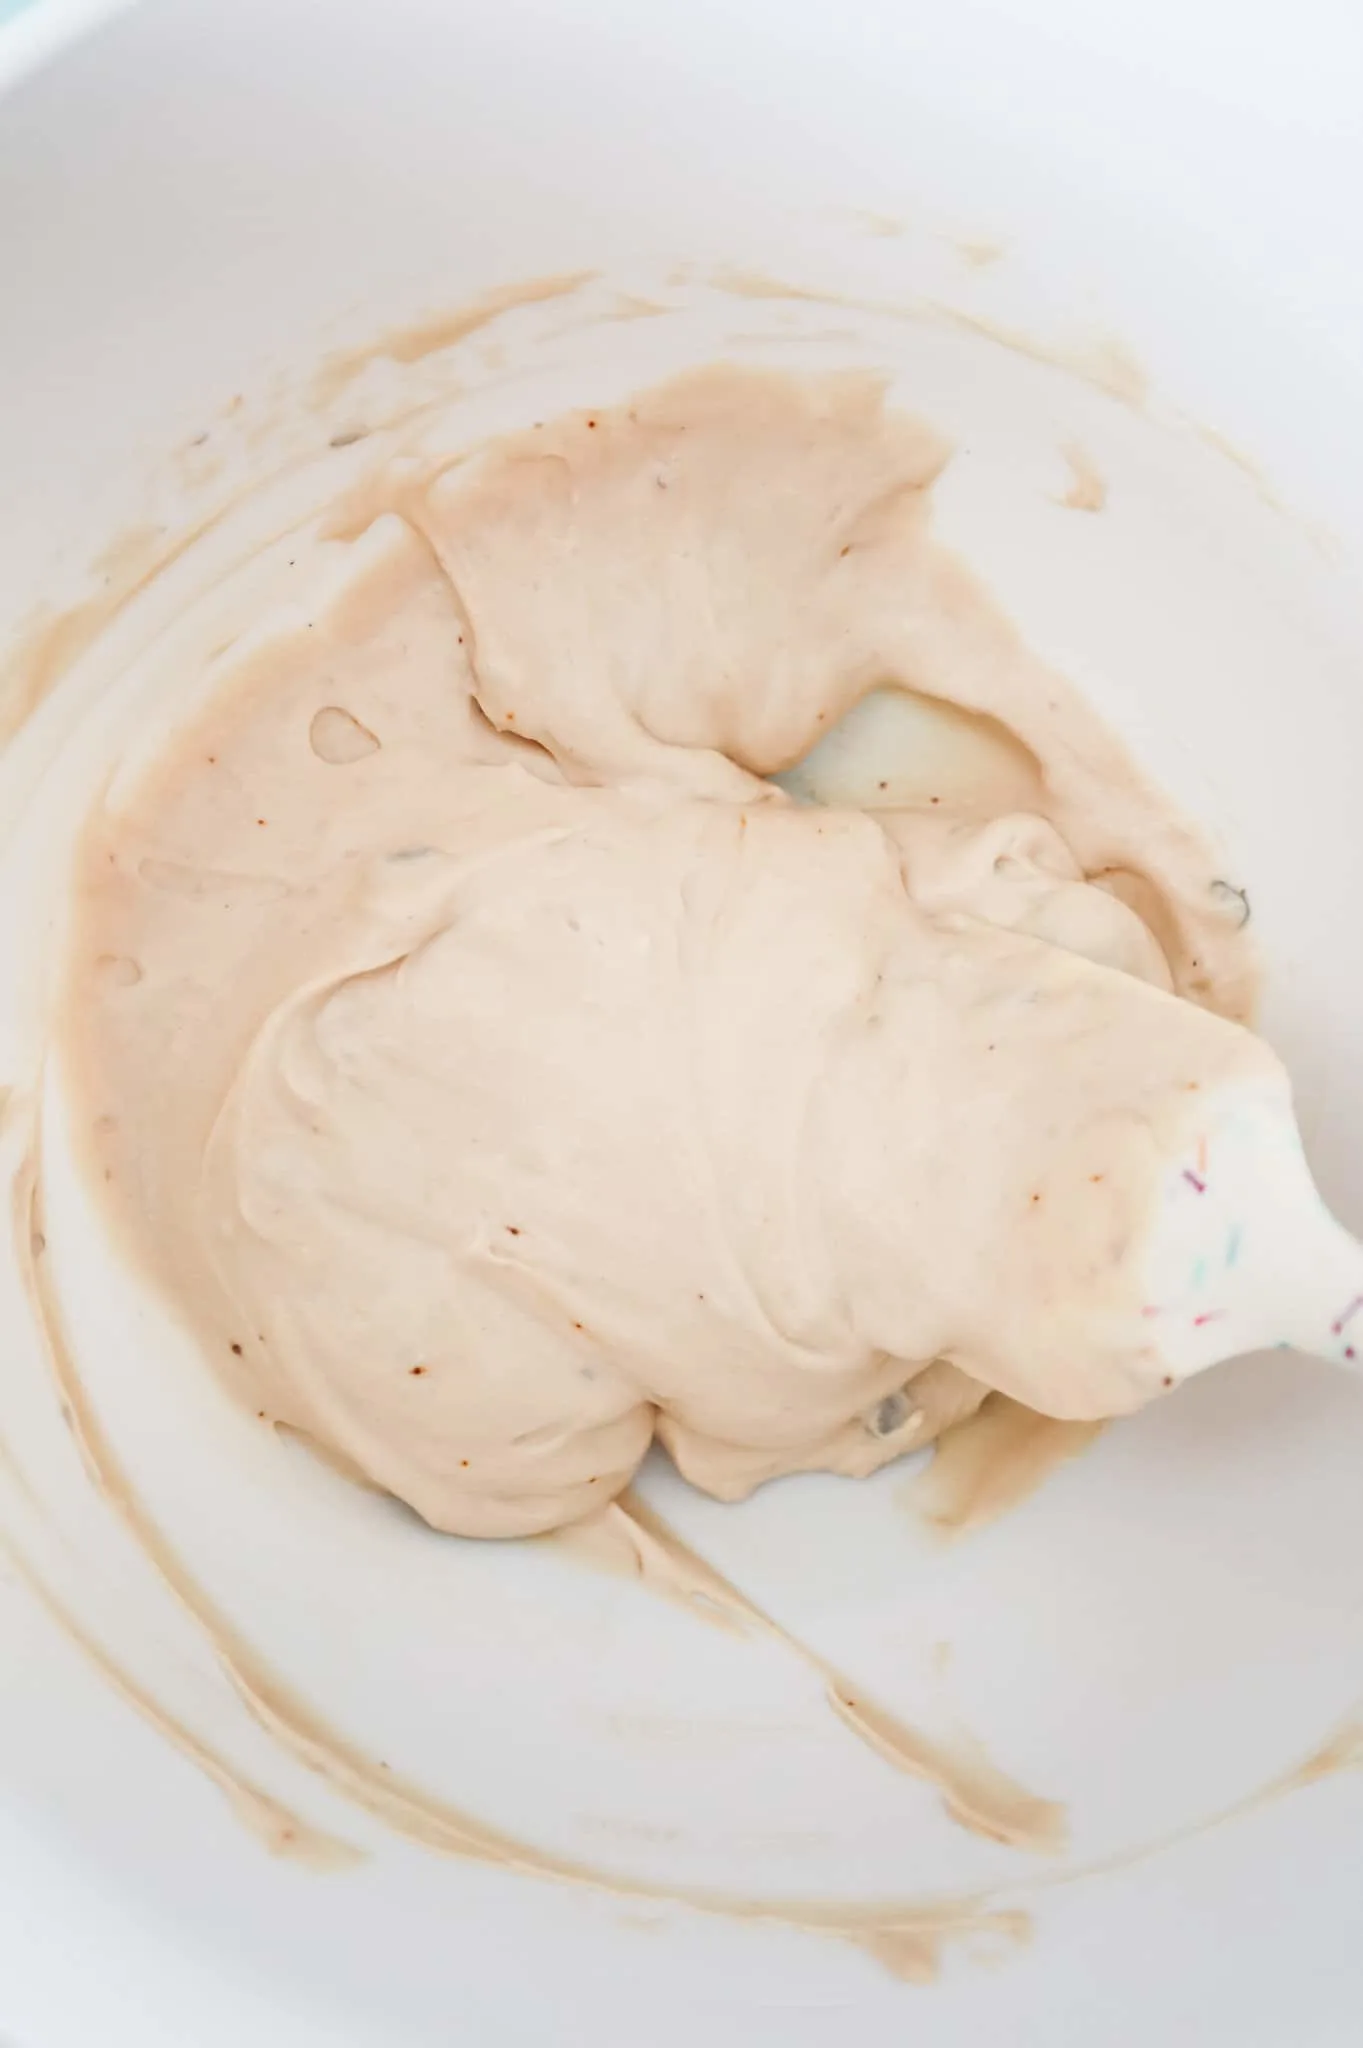 cream of mushroom soup and sour cream mixture in a mixing bowl